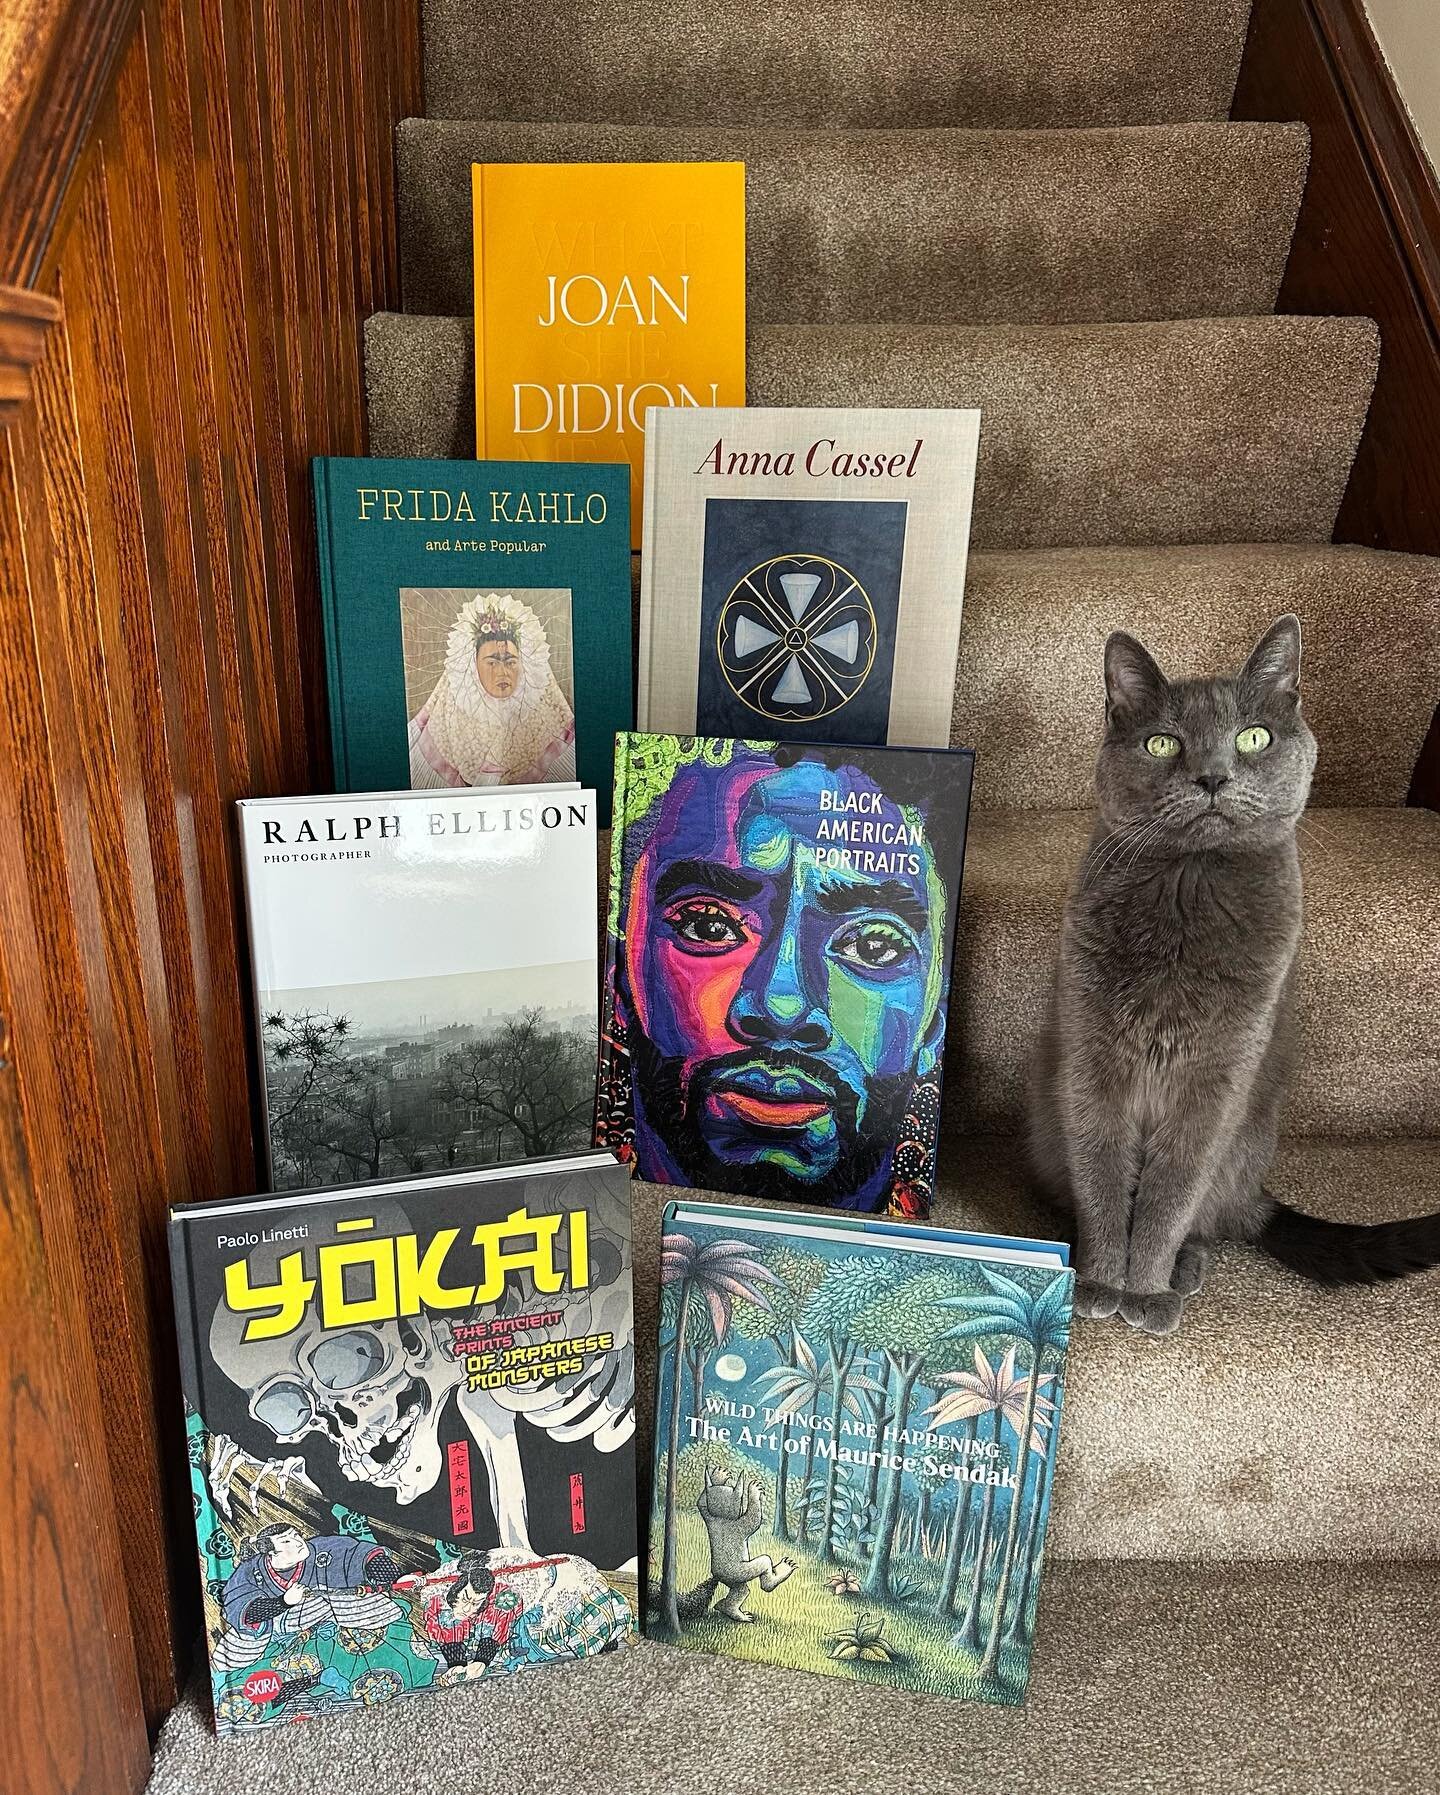 Honestly, what&rsquo;s more exciting than a box of books from @artbook? 🤩🤩🤩 🐈&zwj;⬛ for scale. 
Recent releases from Fall 22 and Spring 23:
Joan Didion What She Means
Anna Cassel: The Tale of the Rose
Frida Kahlo and Arte Popular
Black American P